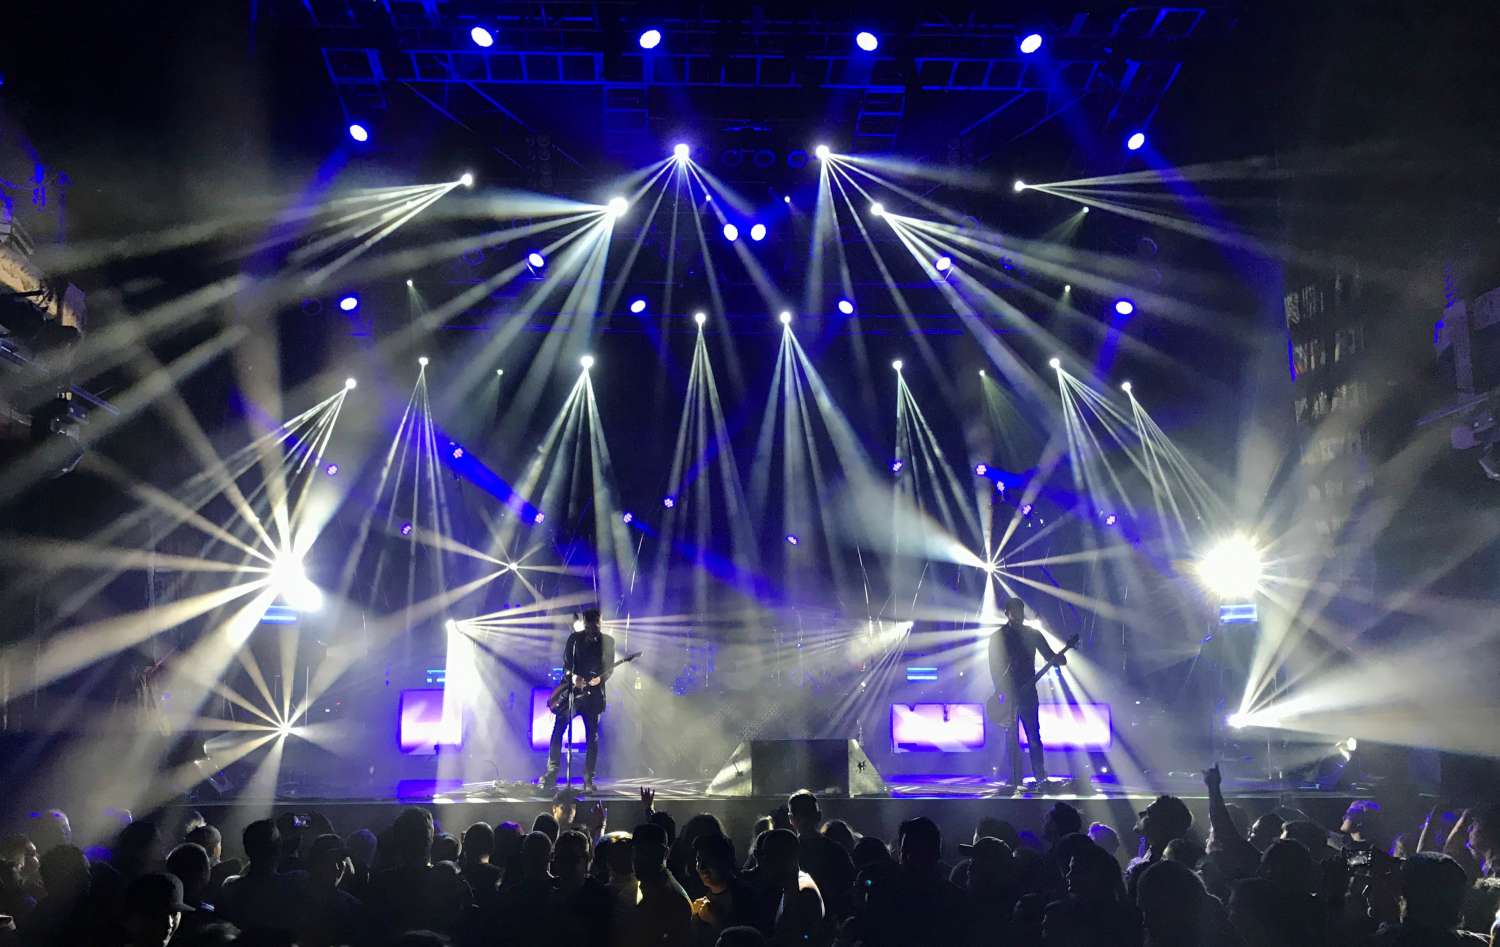 Following the close of their North American tour, Chevelle kicked off a European leg